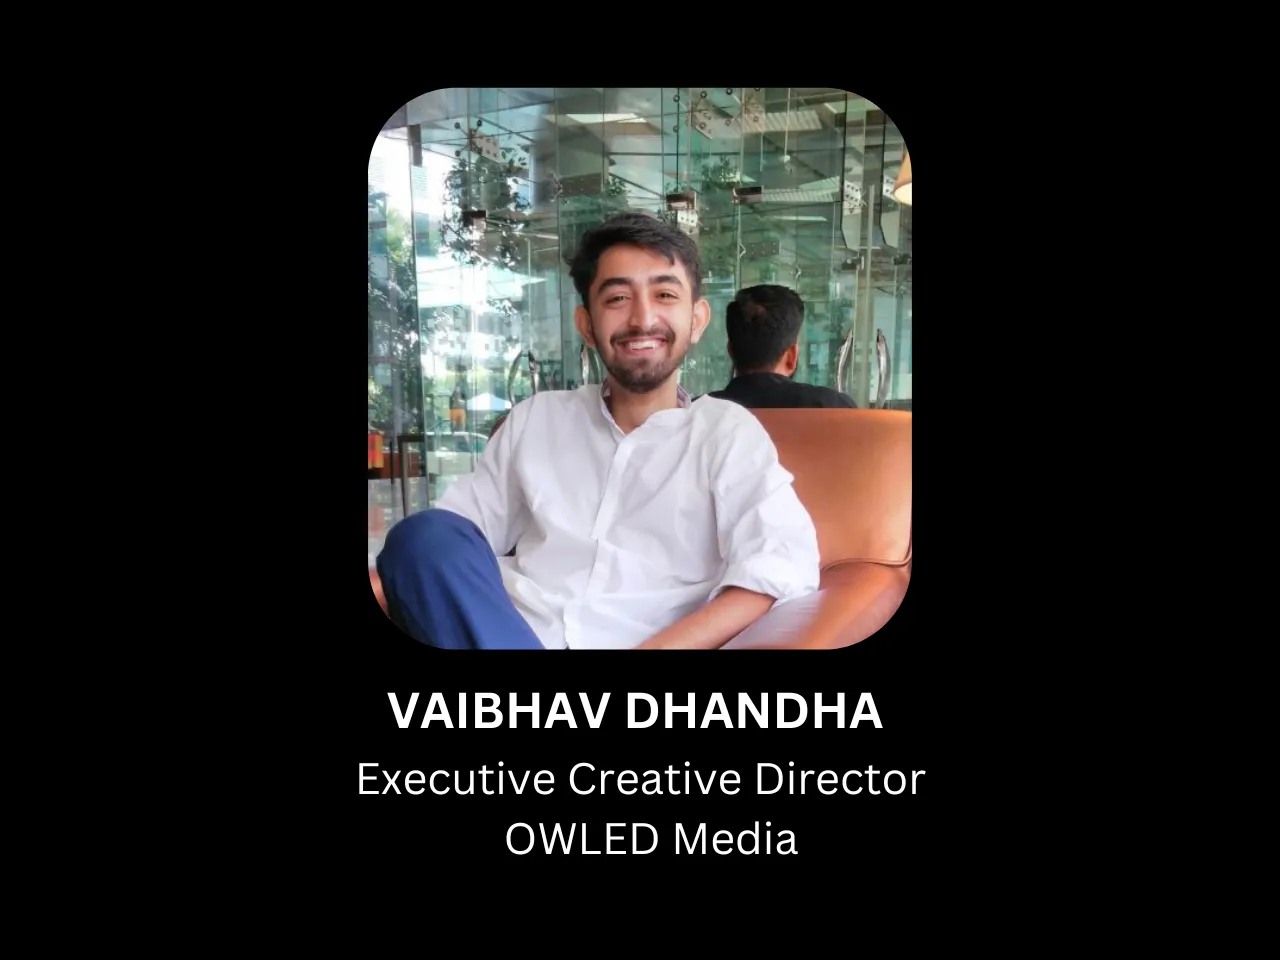 OWLED Media appoints Vaibhav Dhandha as Executive Creative Director